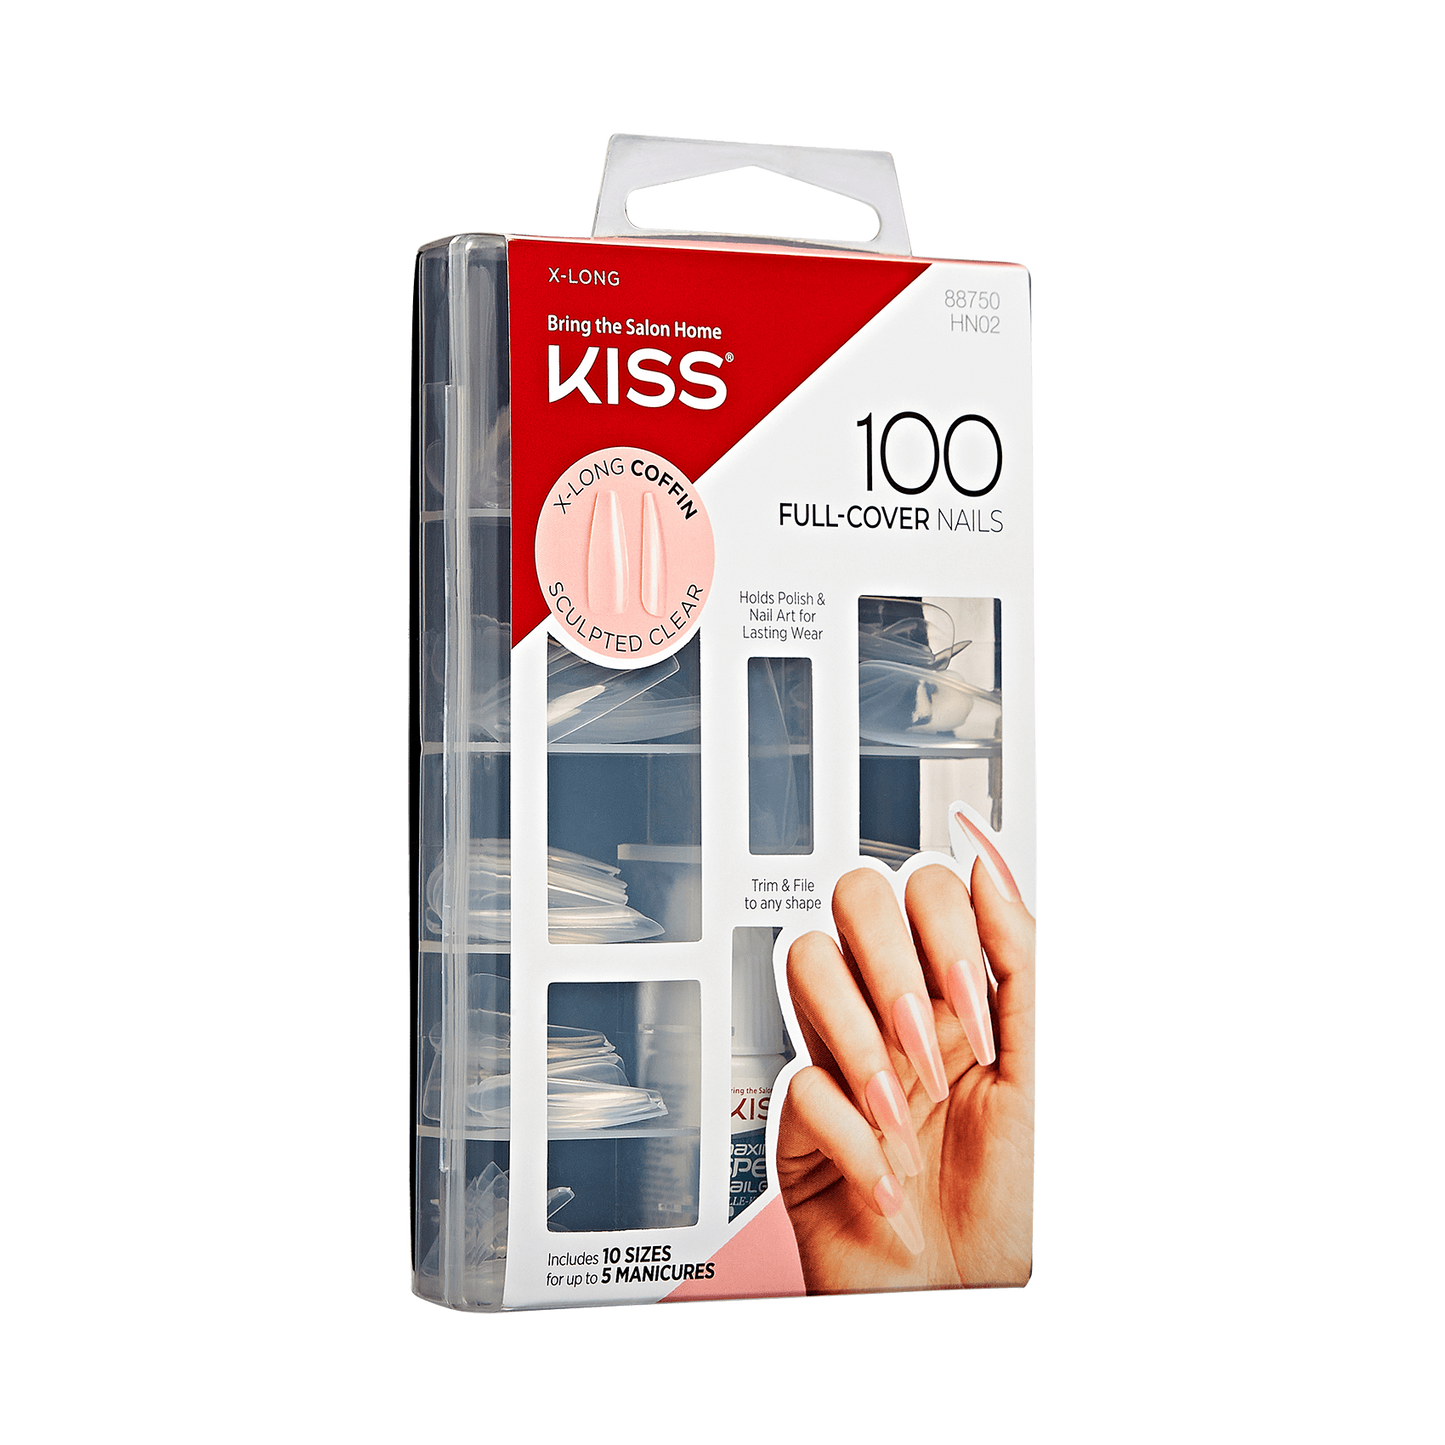 KISS 100 Full Cover Nails - CLEAR